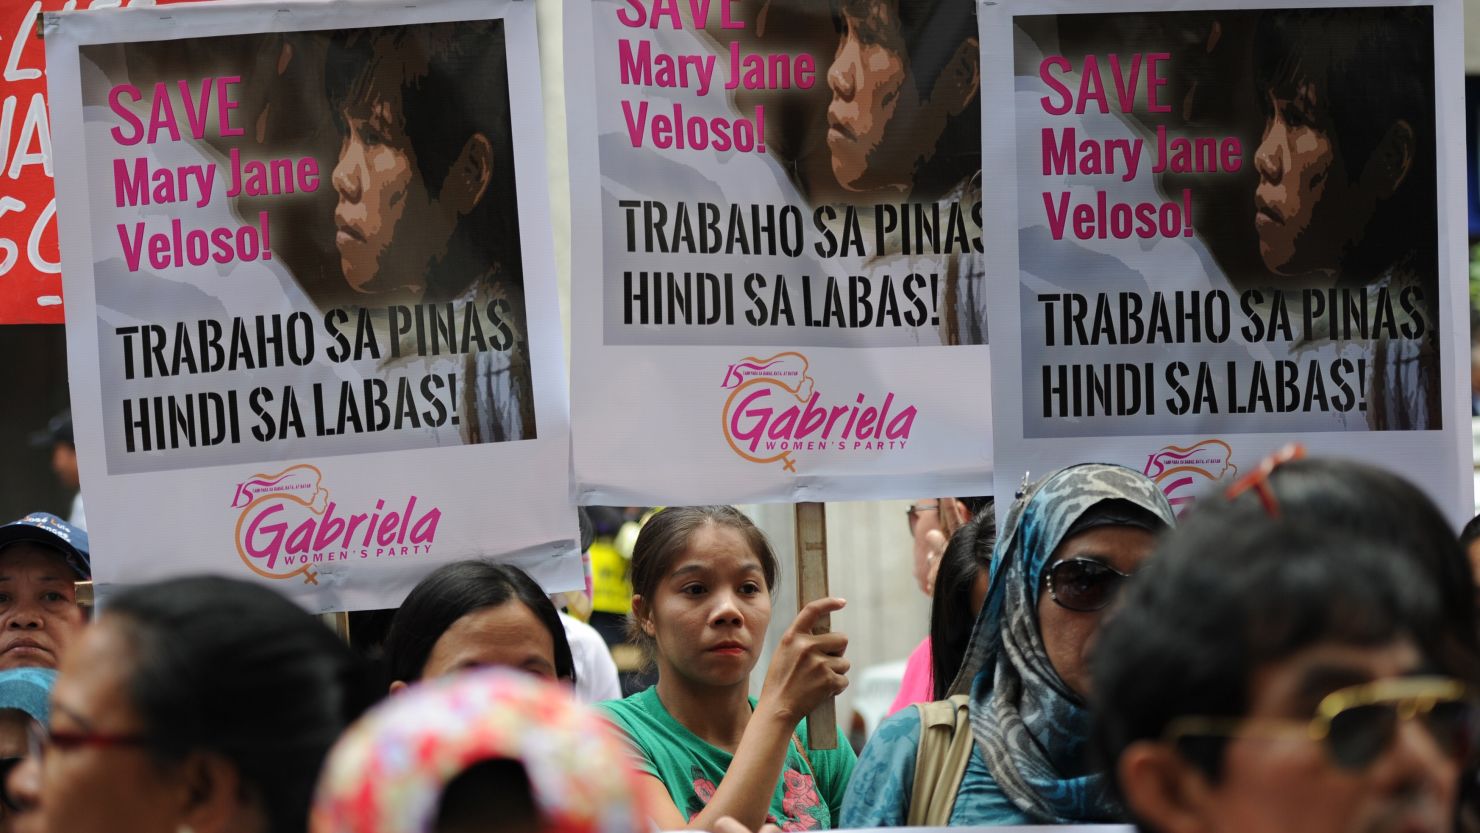 Supporters hold a protest in front of the Indonesian embassy in Manila on April 24 in support of Mary Jane Veloso.